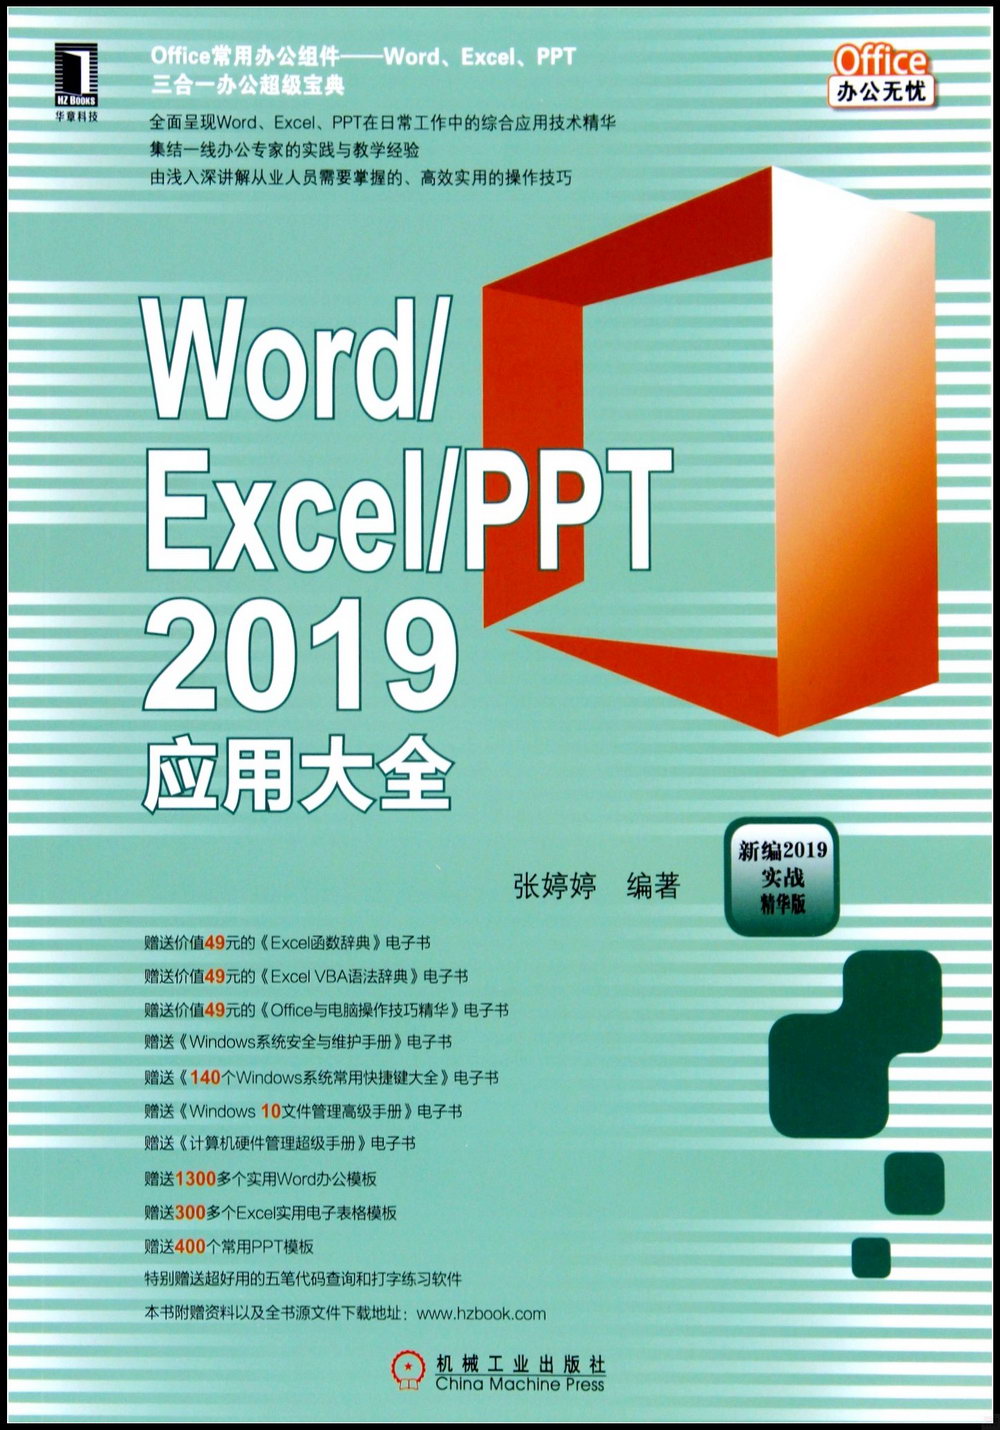 Word/Excel/PPT 2019應用大全